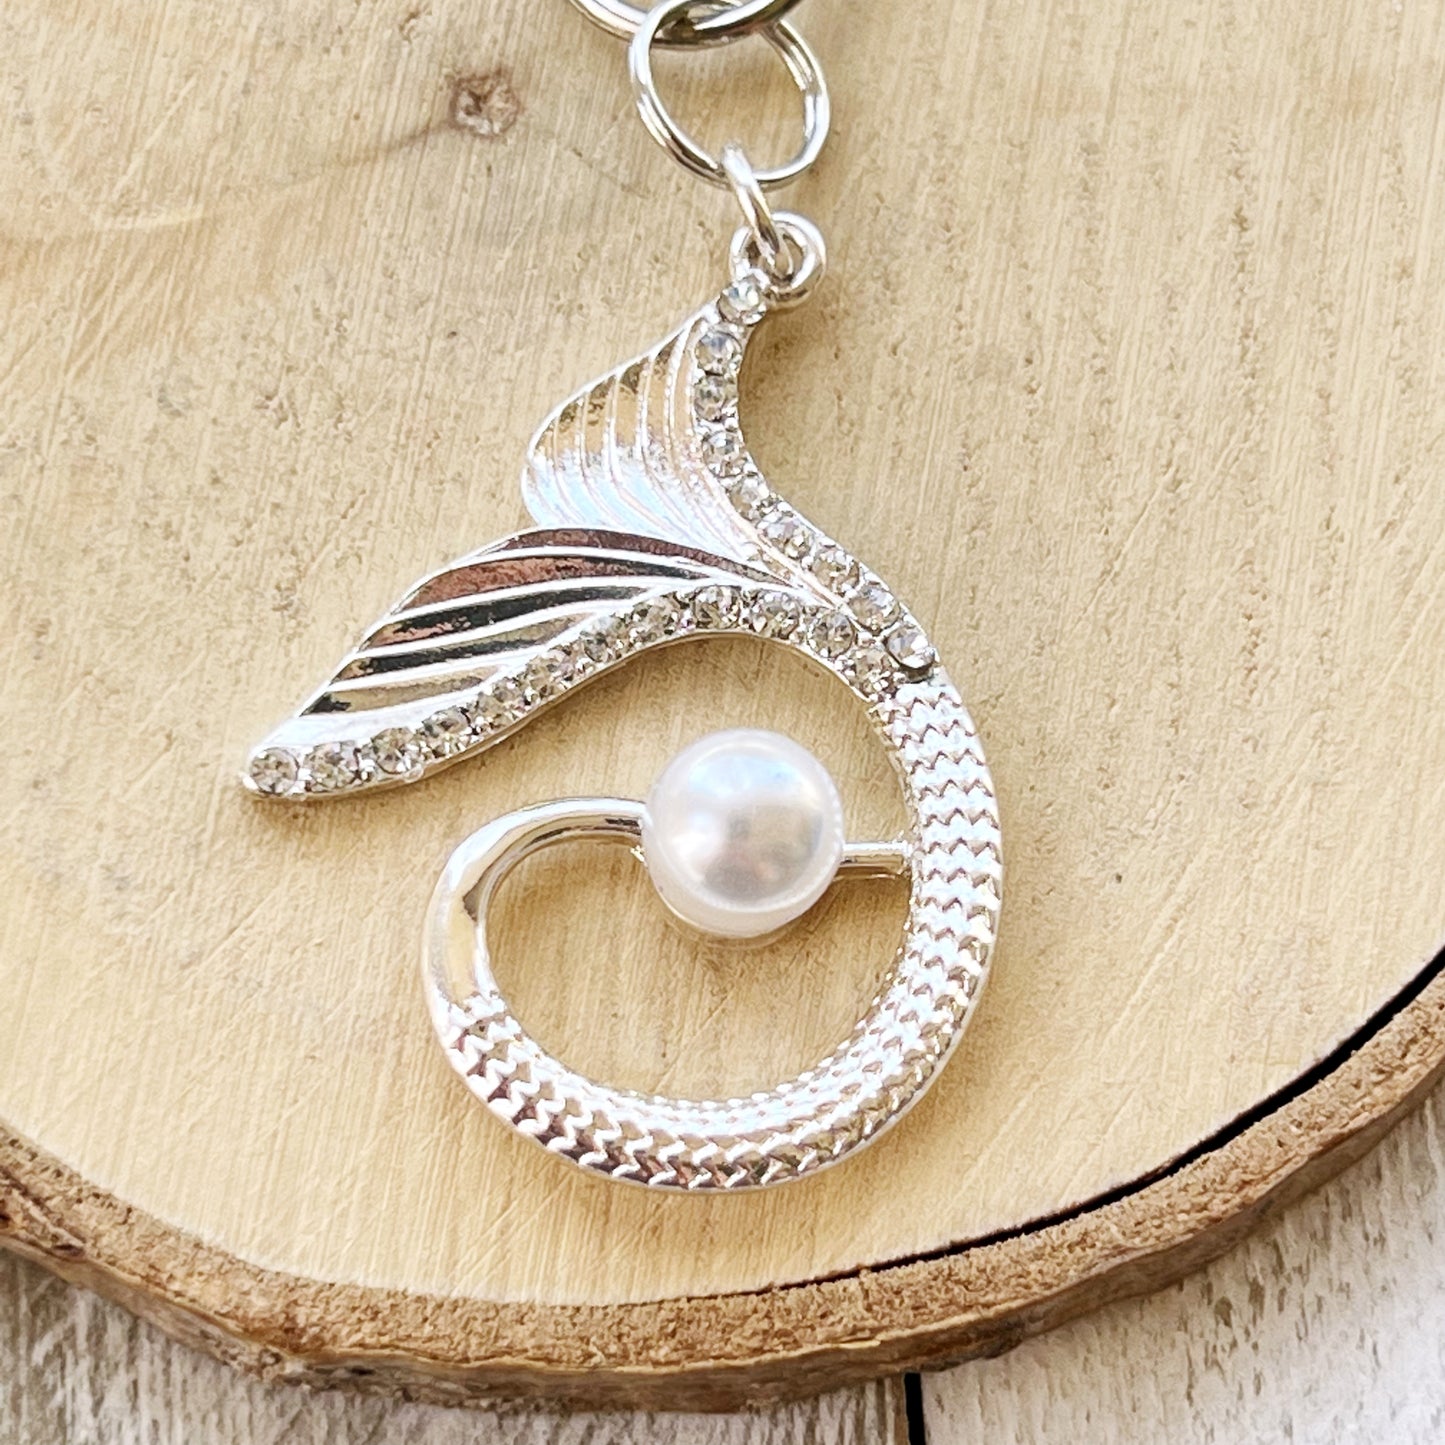 Silver Mermaid Zipper Pull Keychain Charm with Pearl and Rhinestone Accents